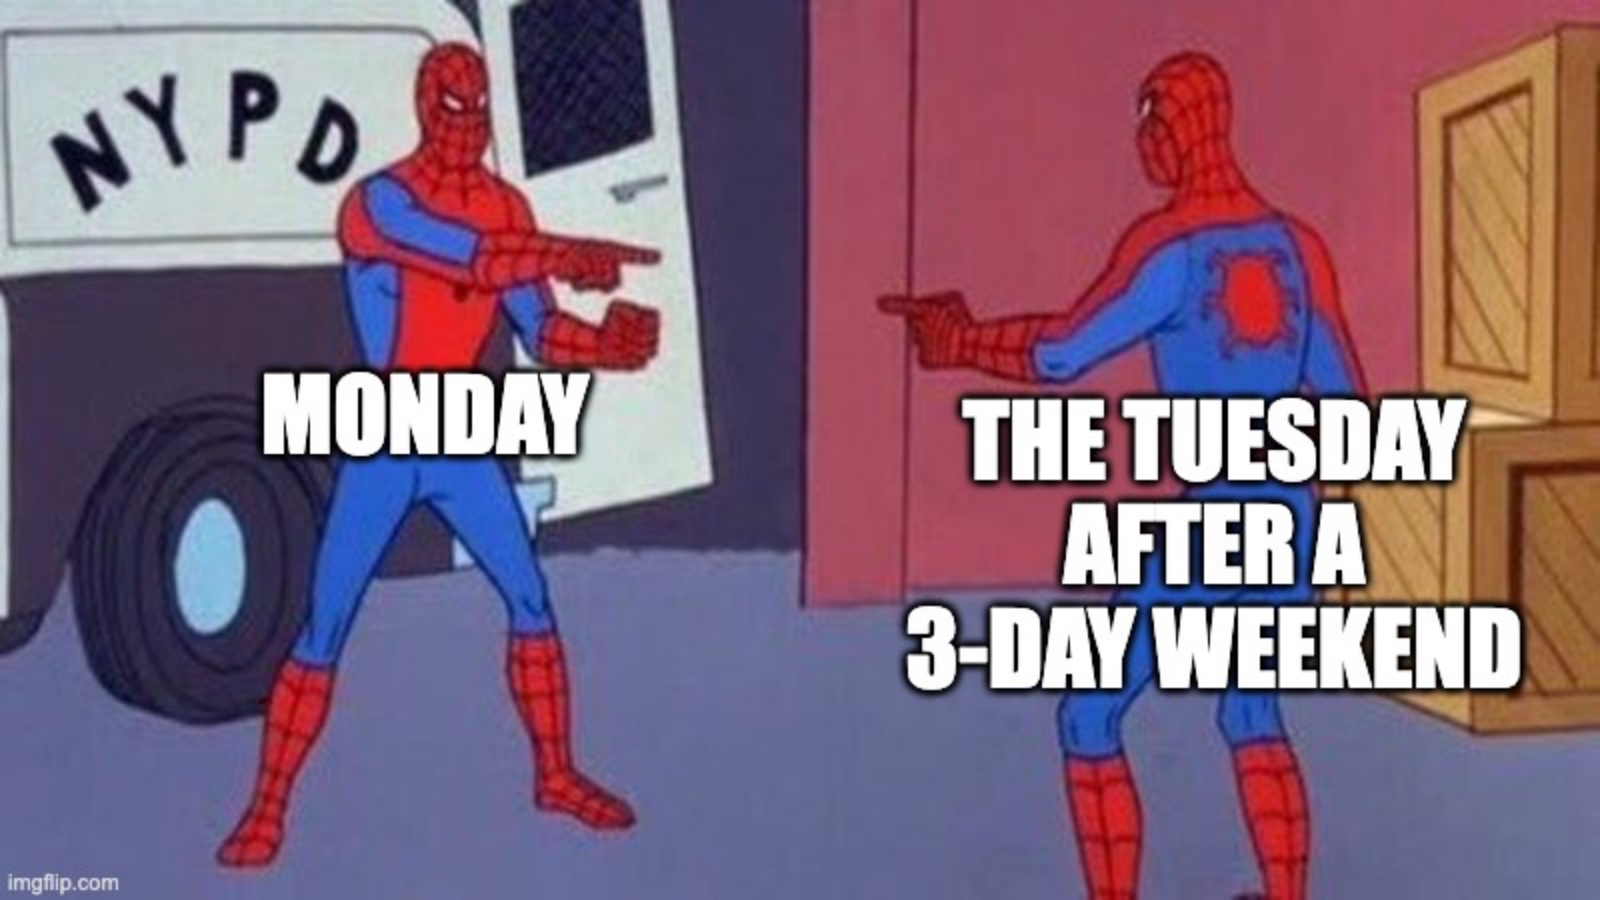 funny meme about long weekends and Spider-Man pointing